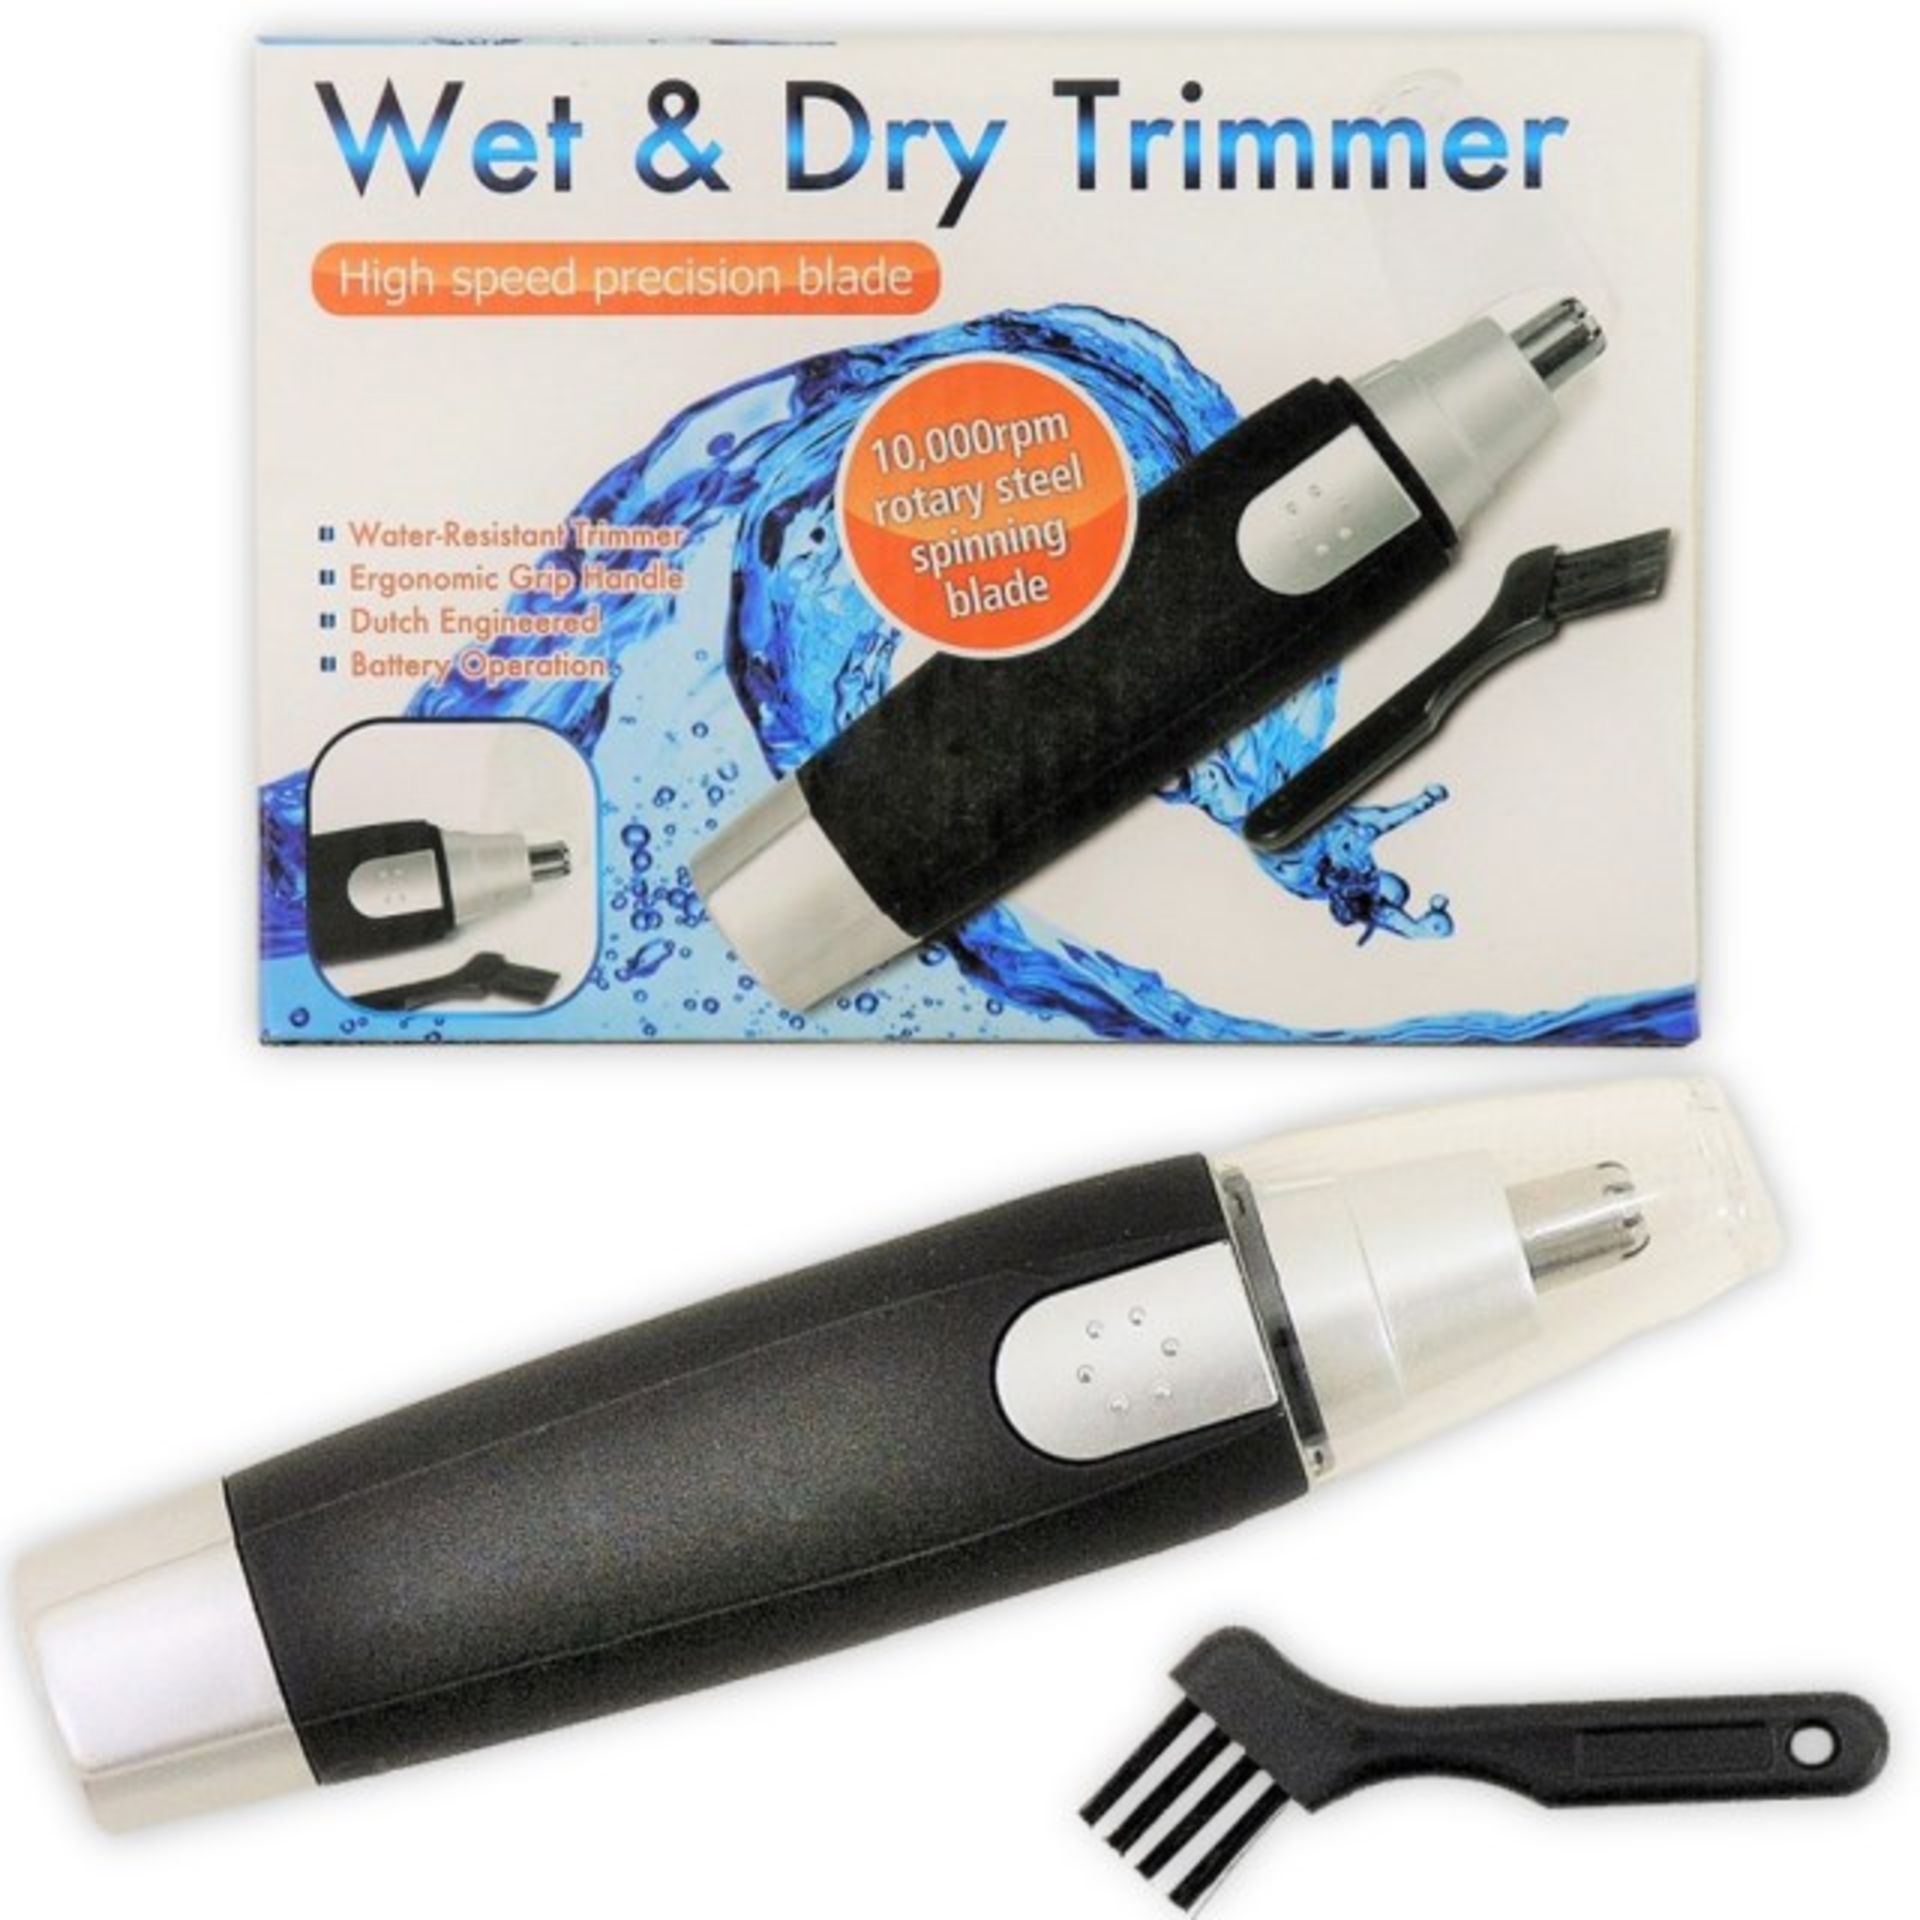 V Brand New Wet & Dry Trimmer With Ergonomic Handle - Water Resistant - Dutch Engineered X 2 YOUR